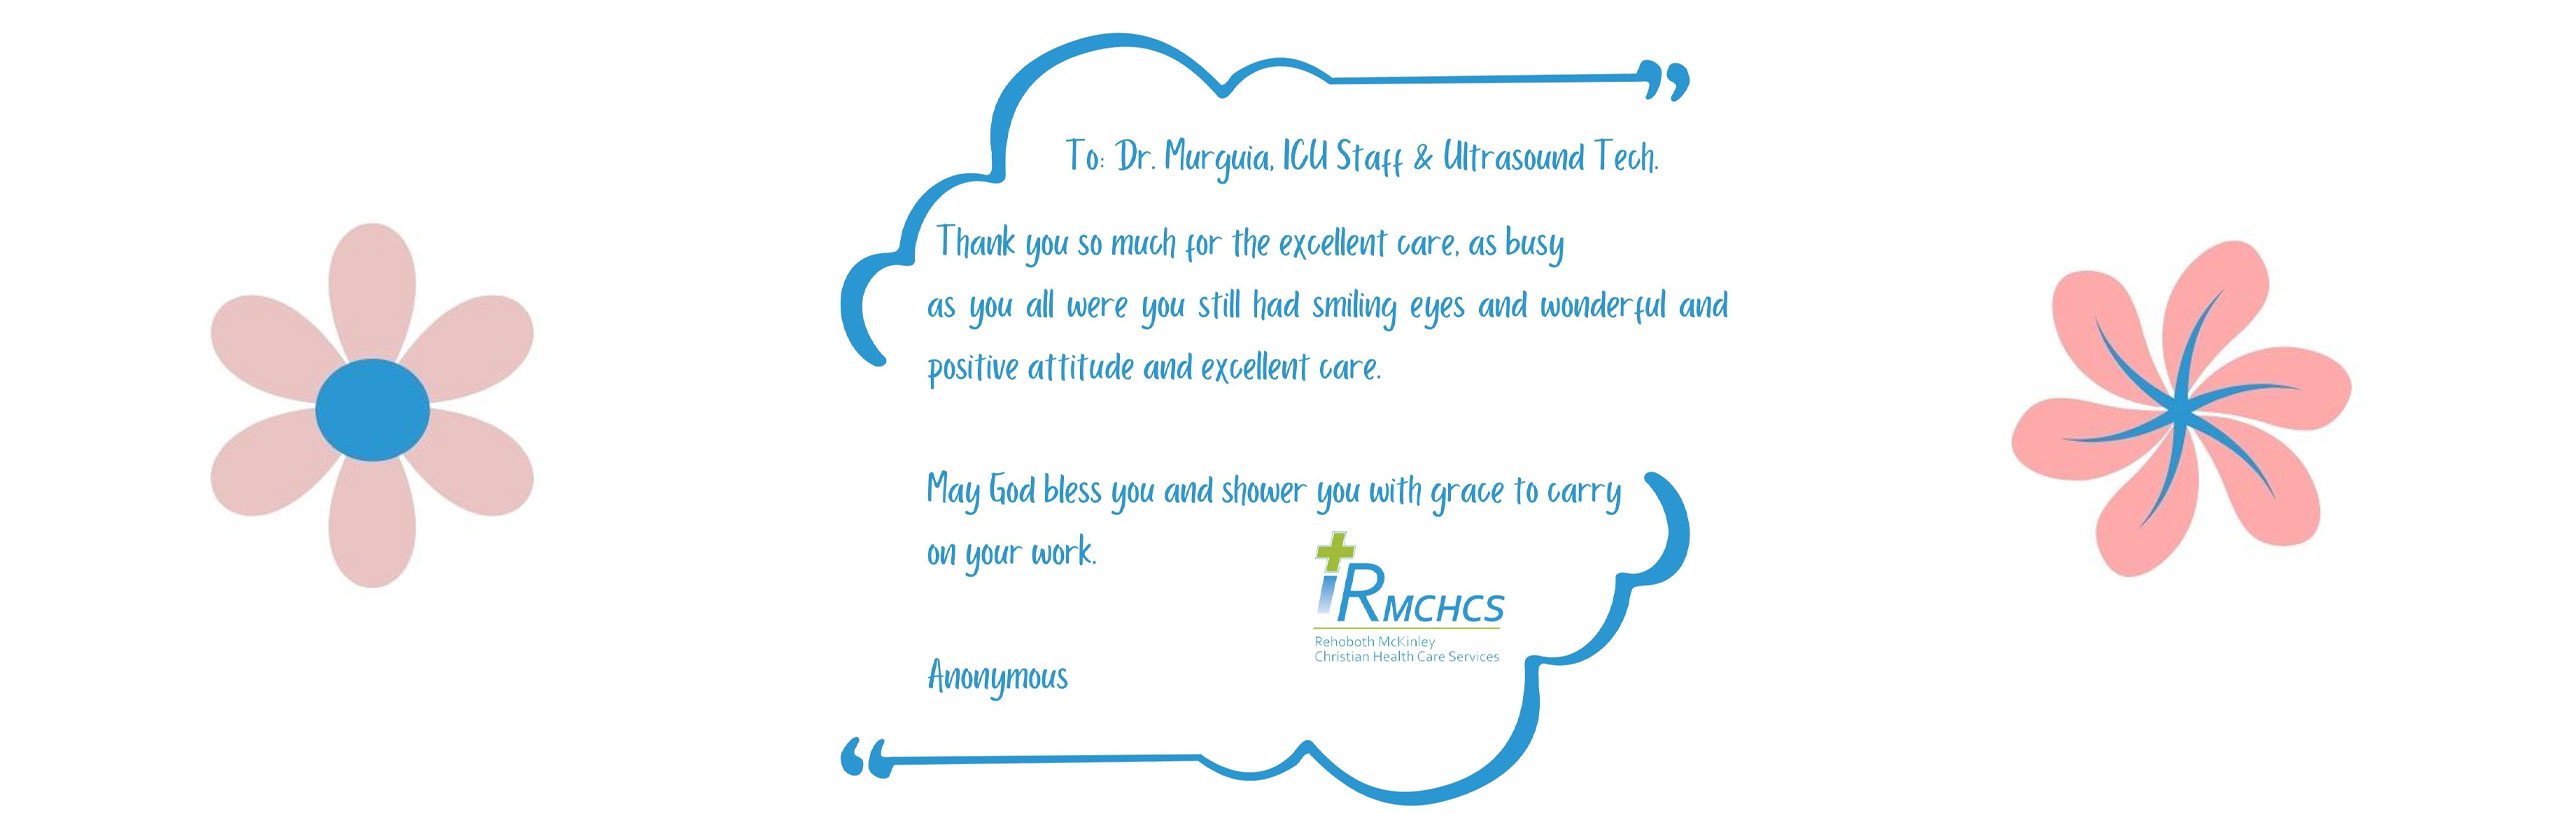 To: Dr. Murguia, ICU Staff & Ultrasound Tech.

Thank you so much for the excellent care, as busy as you all were, you still had smiling eyes and wonderful and positive attitude and excellent care.

May God bless you and shower you with grace to carry on your work.

-Annoymous

RMCHCS
Rehoboth Mckinley Christian HealthCare Services